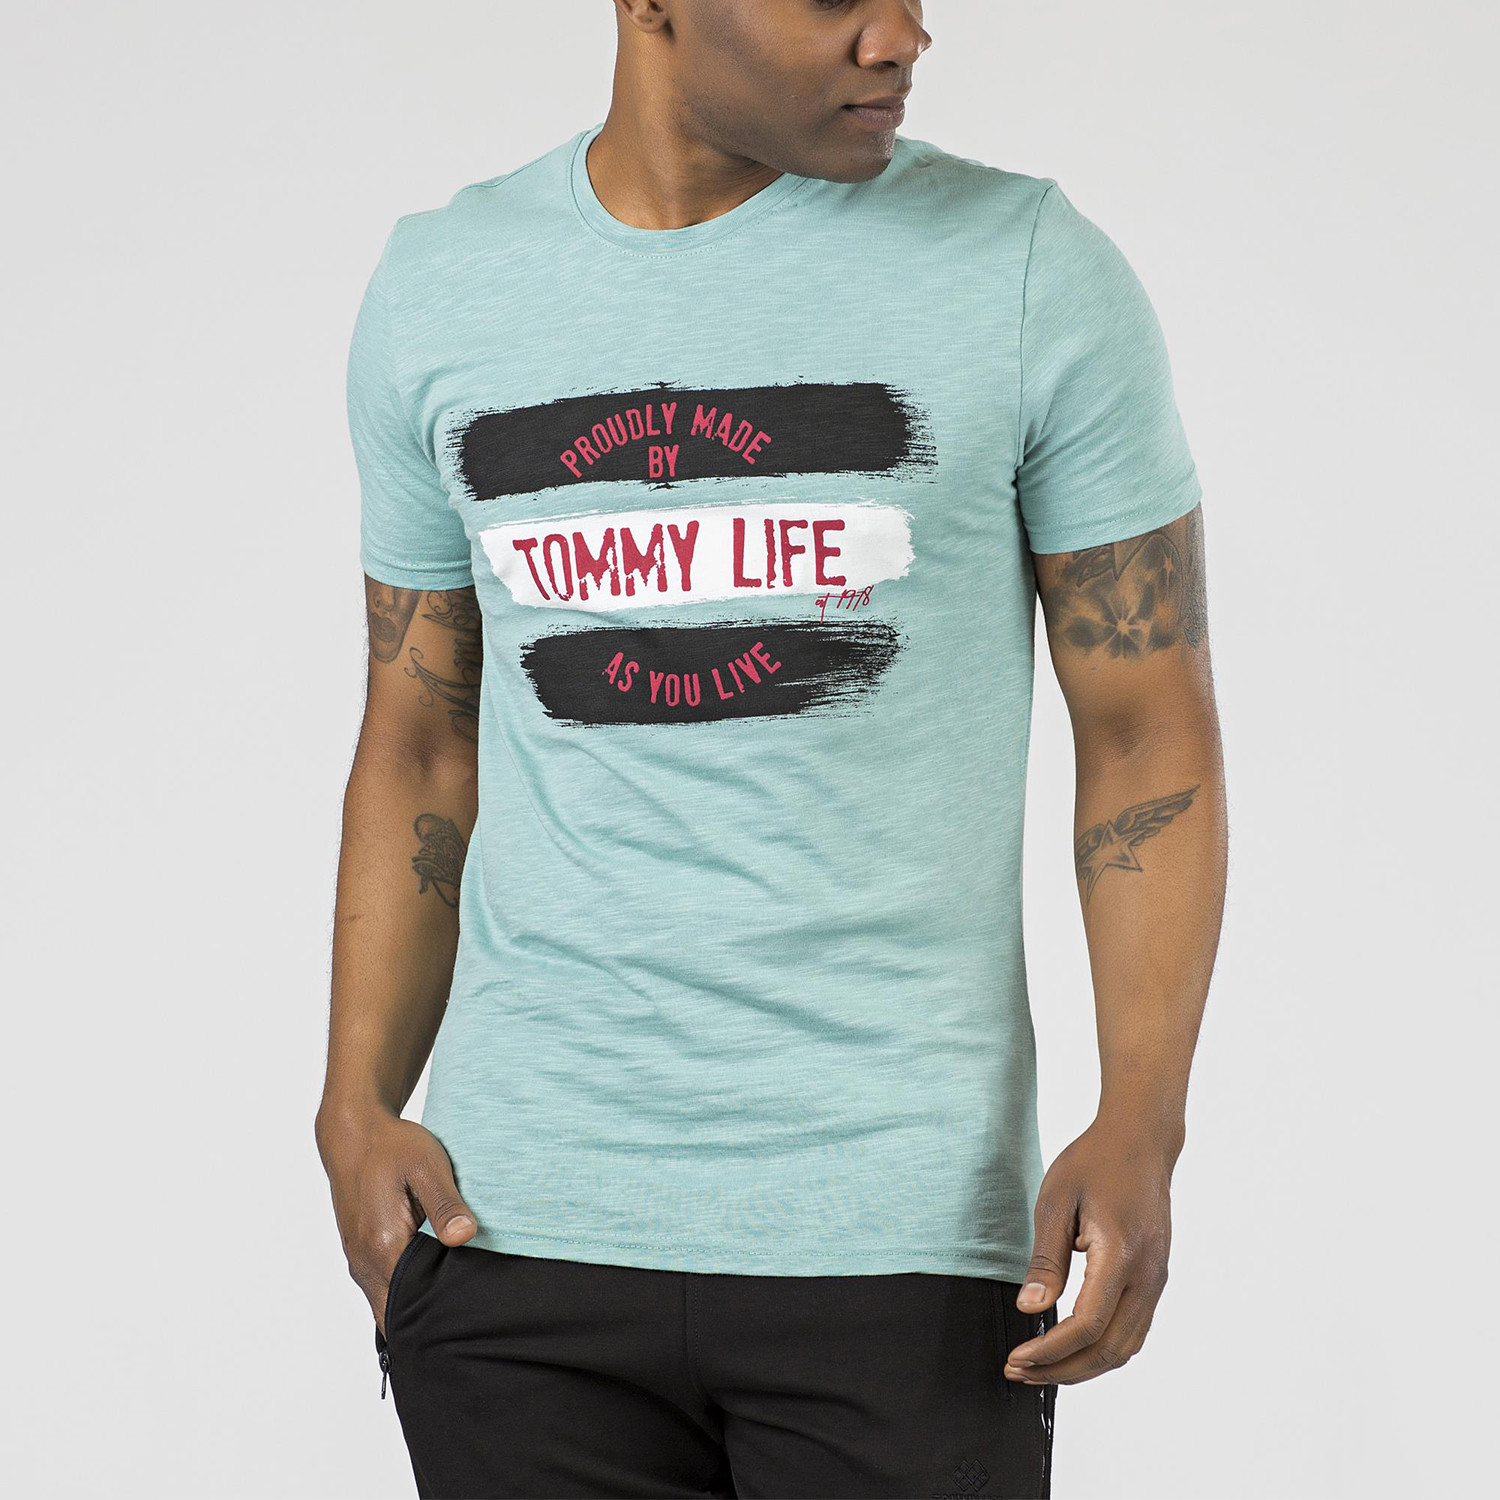 tommy life clothing